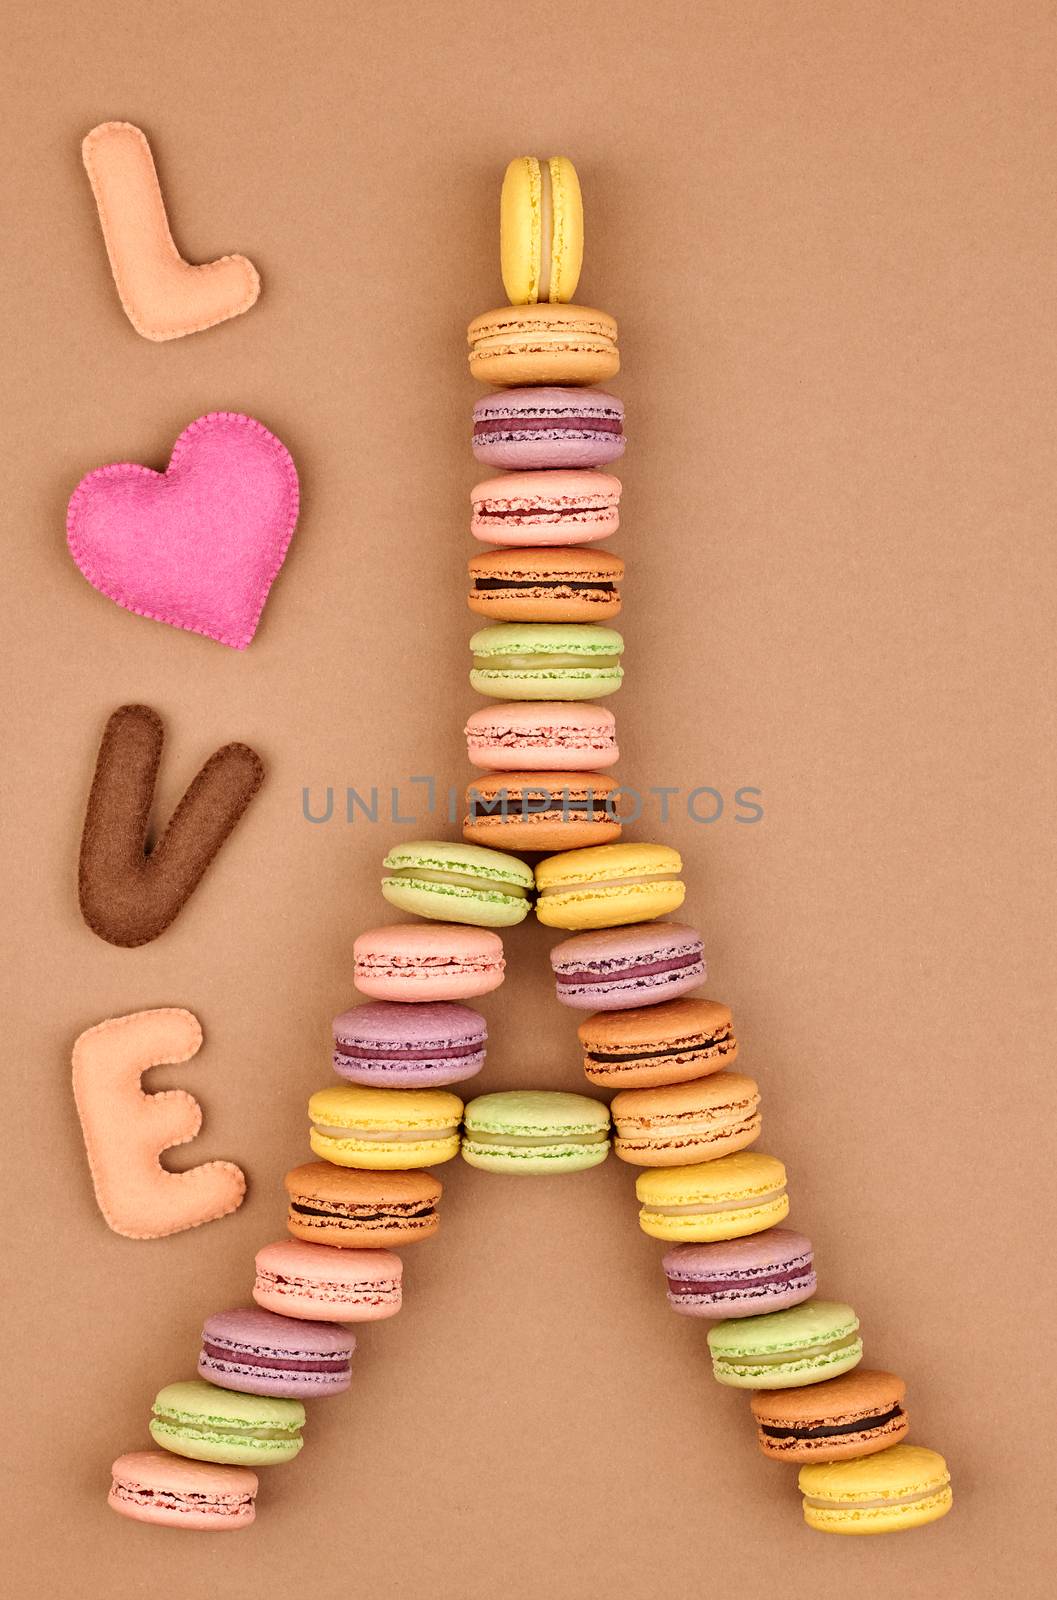 Macarons Eiffel Tower french sweet colorful, Word Love heart. A lot of fresh  pastel delicious biscuit dessert on chocolate retro vintage background.                                           